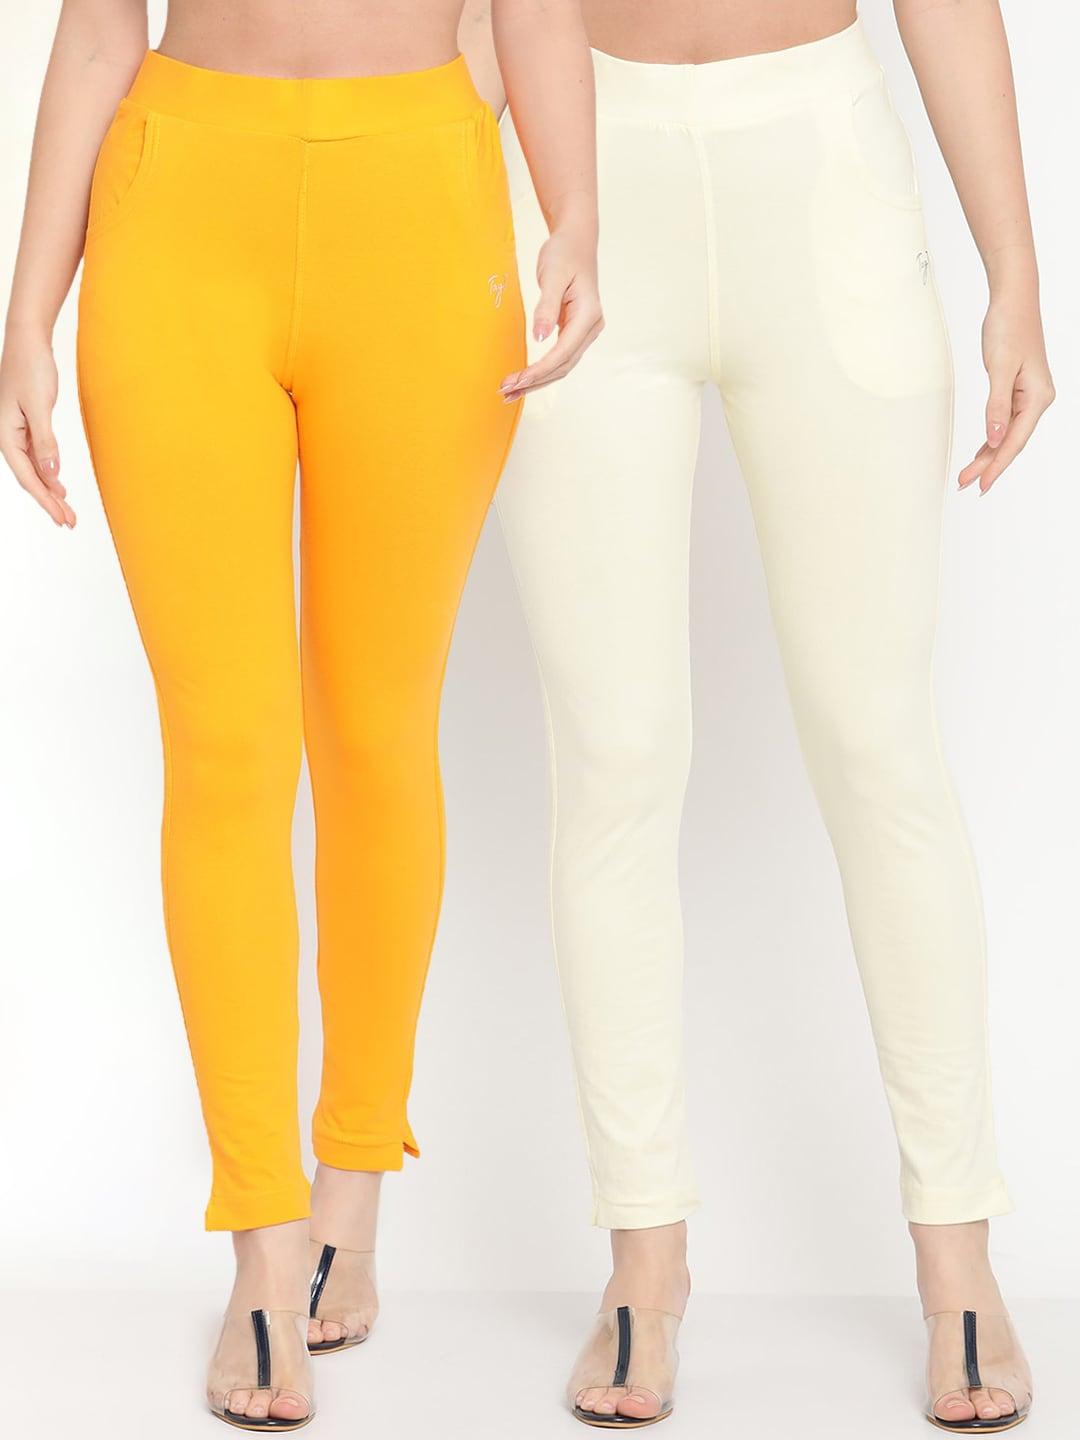 tag-7-women-white-&-yellow-set-of-2-solid-ankle-length-cotton-leggings